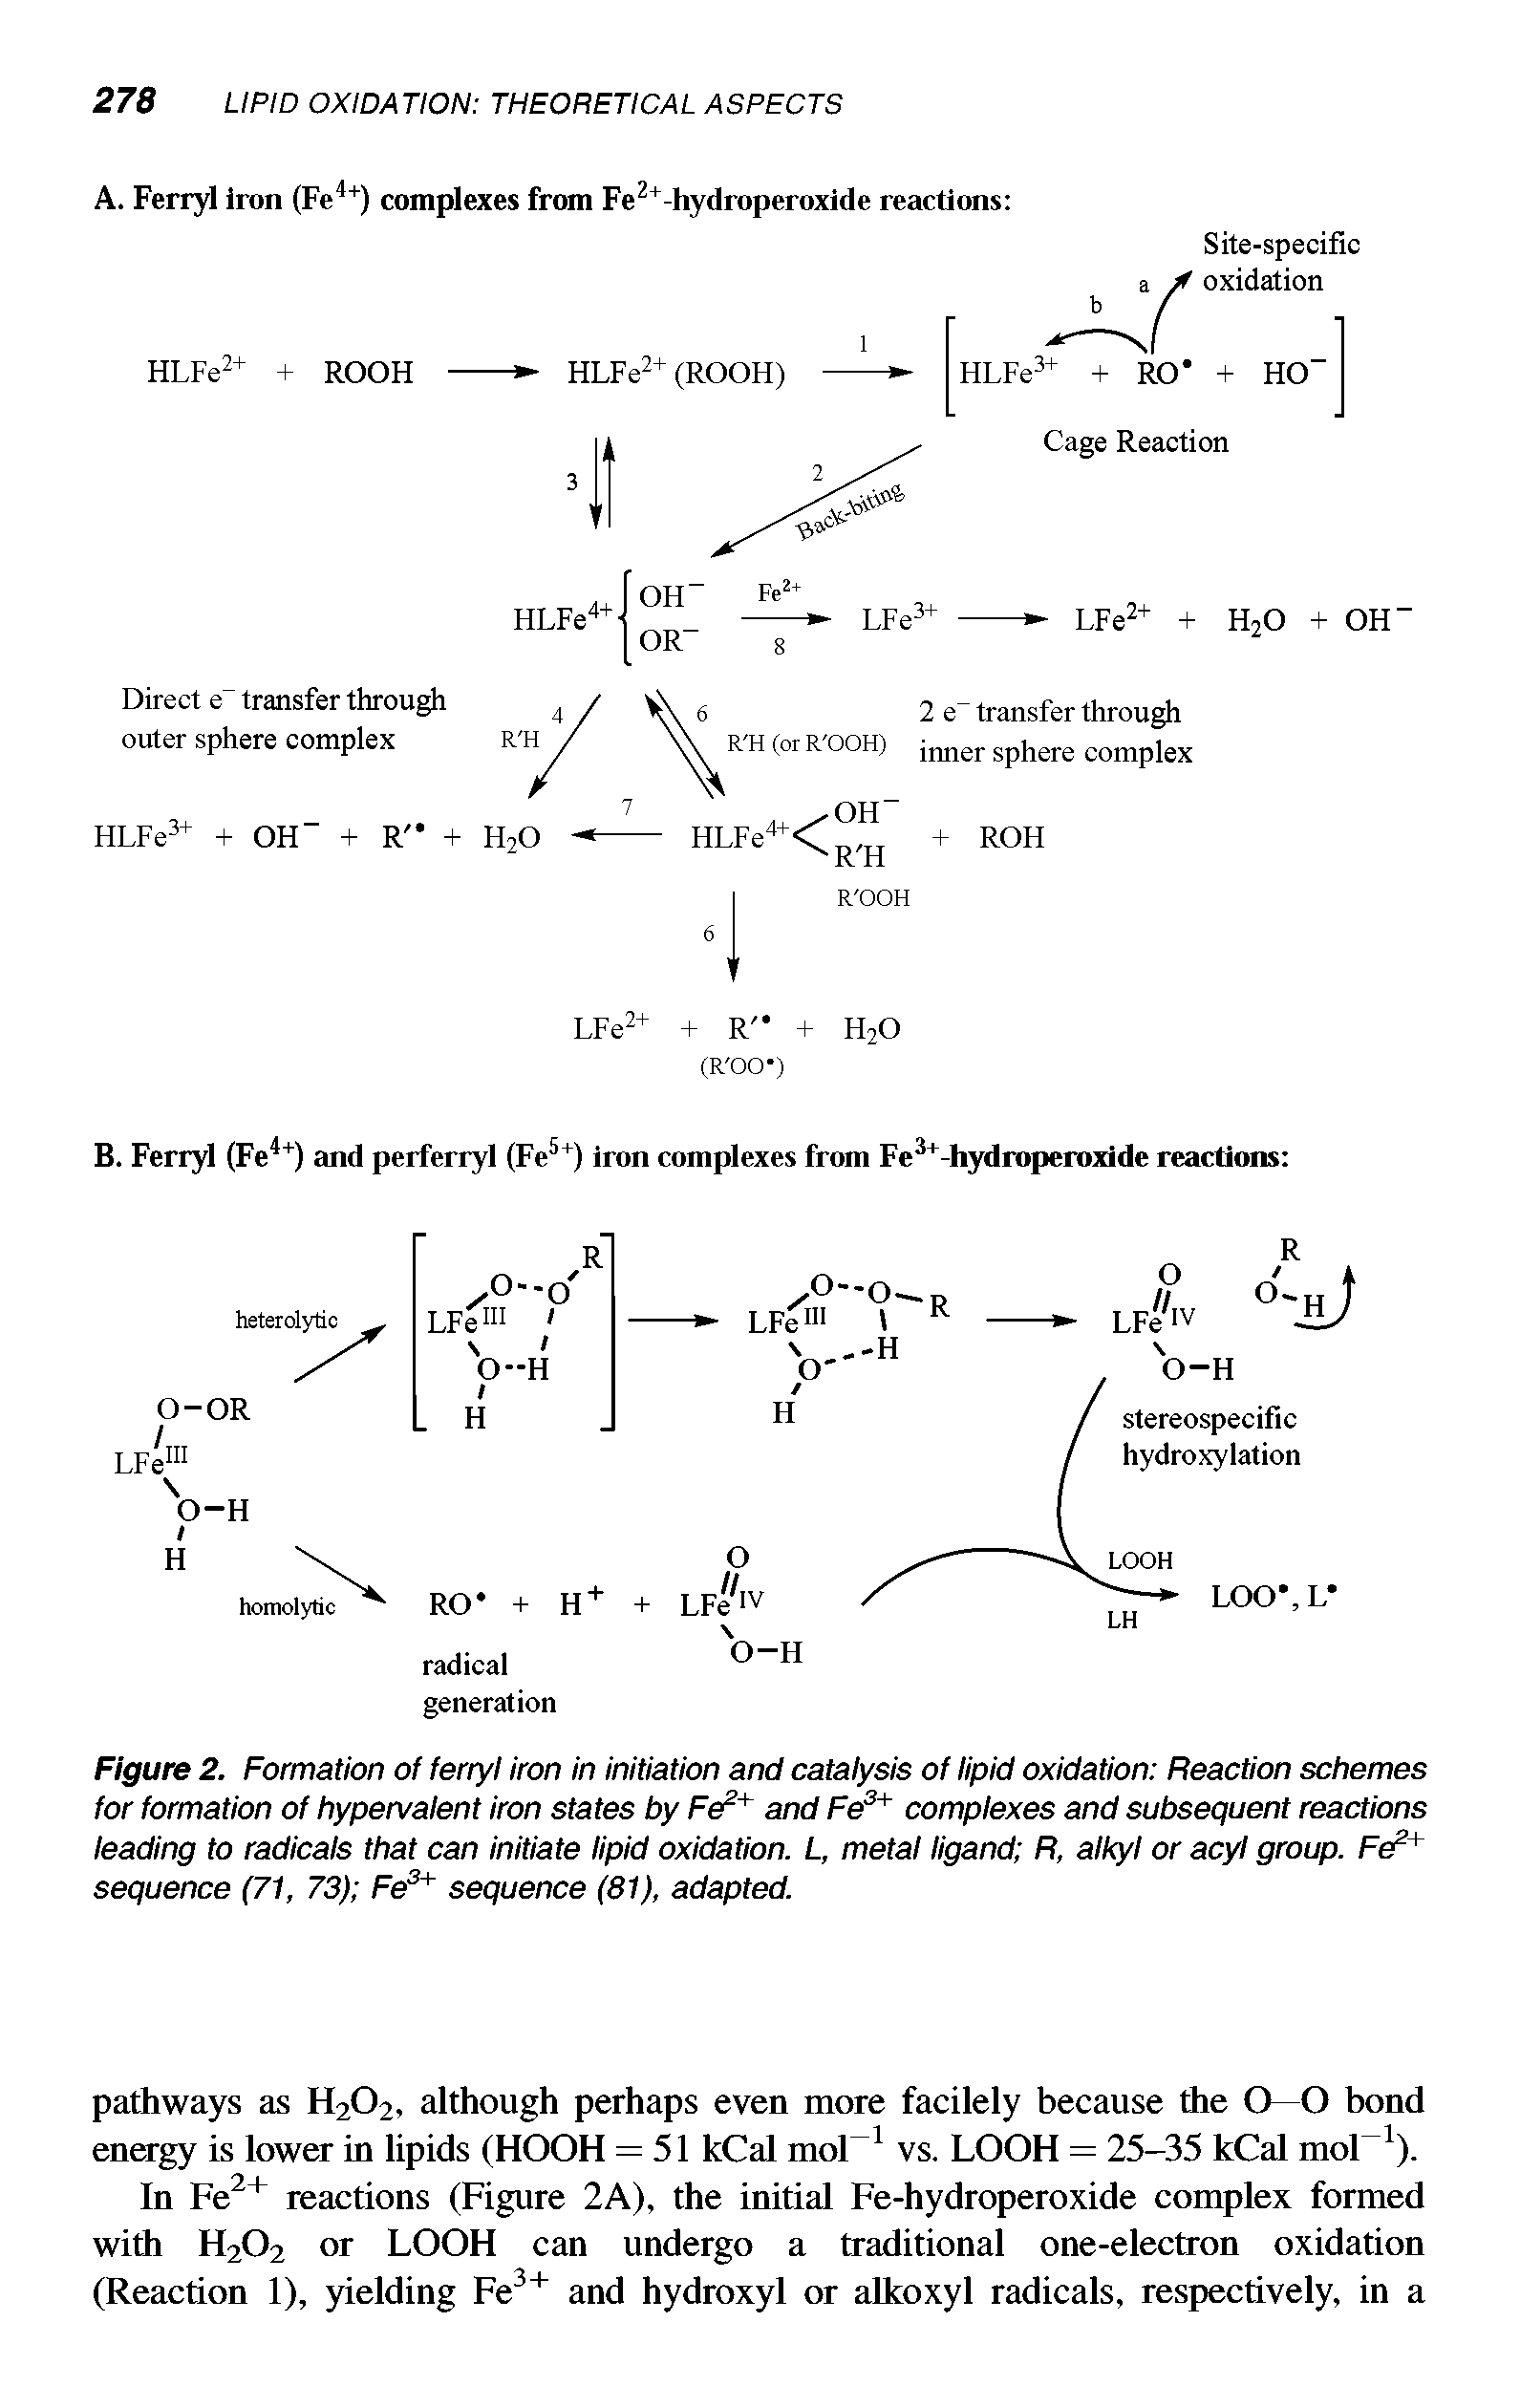 Figure 2. Formation of ferryl iron in initiation and catalysis of lipid oxidation Reaction schemes lor formation of hypervalent iron states by FeF and Fe complexes and subsequent reactions leading to radicals that can initiate lipid oxidation. L, metal ligand R, alkyl or acyl group. Fe + sequence (71, 73) Fe sequence (81), adapted.